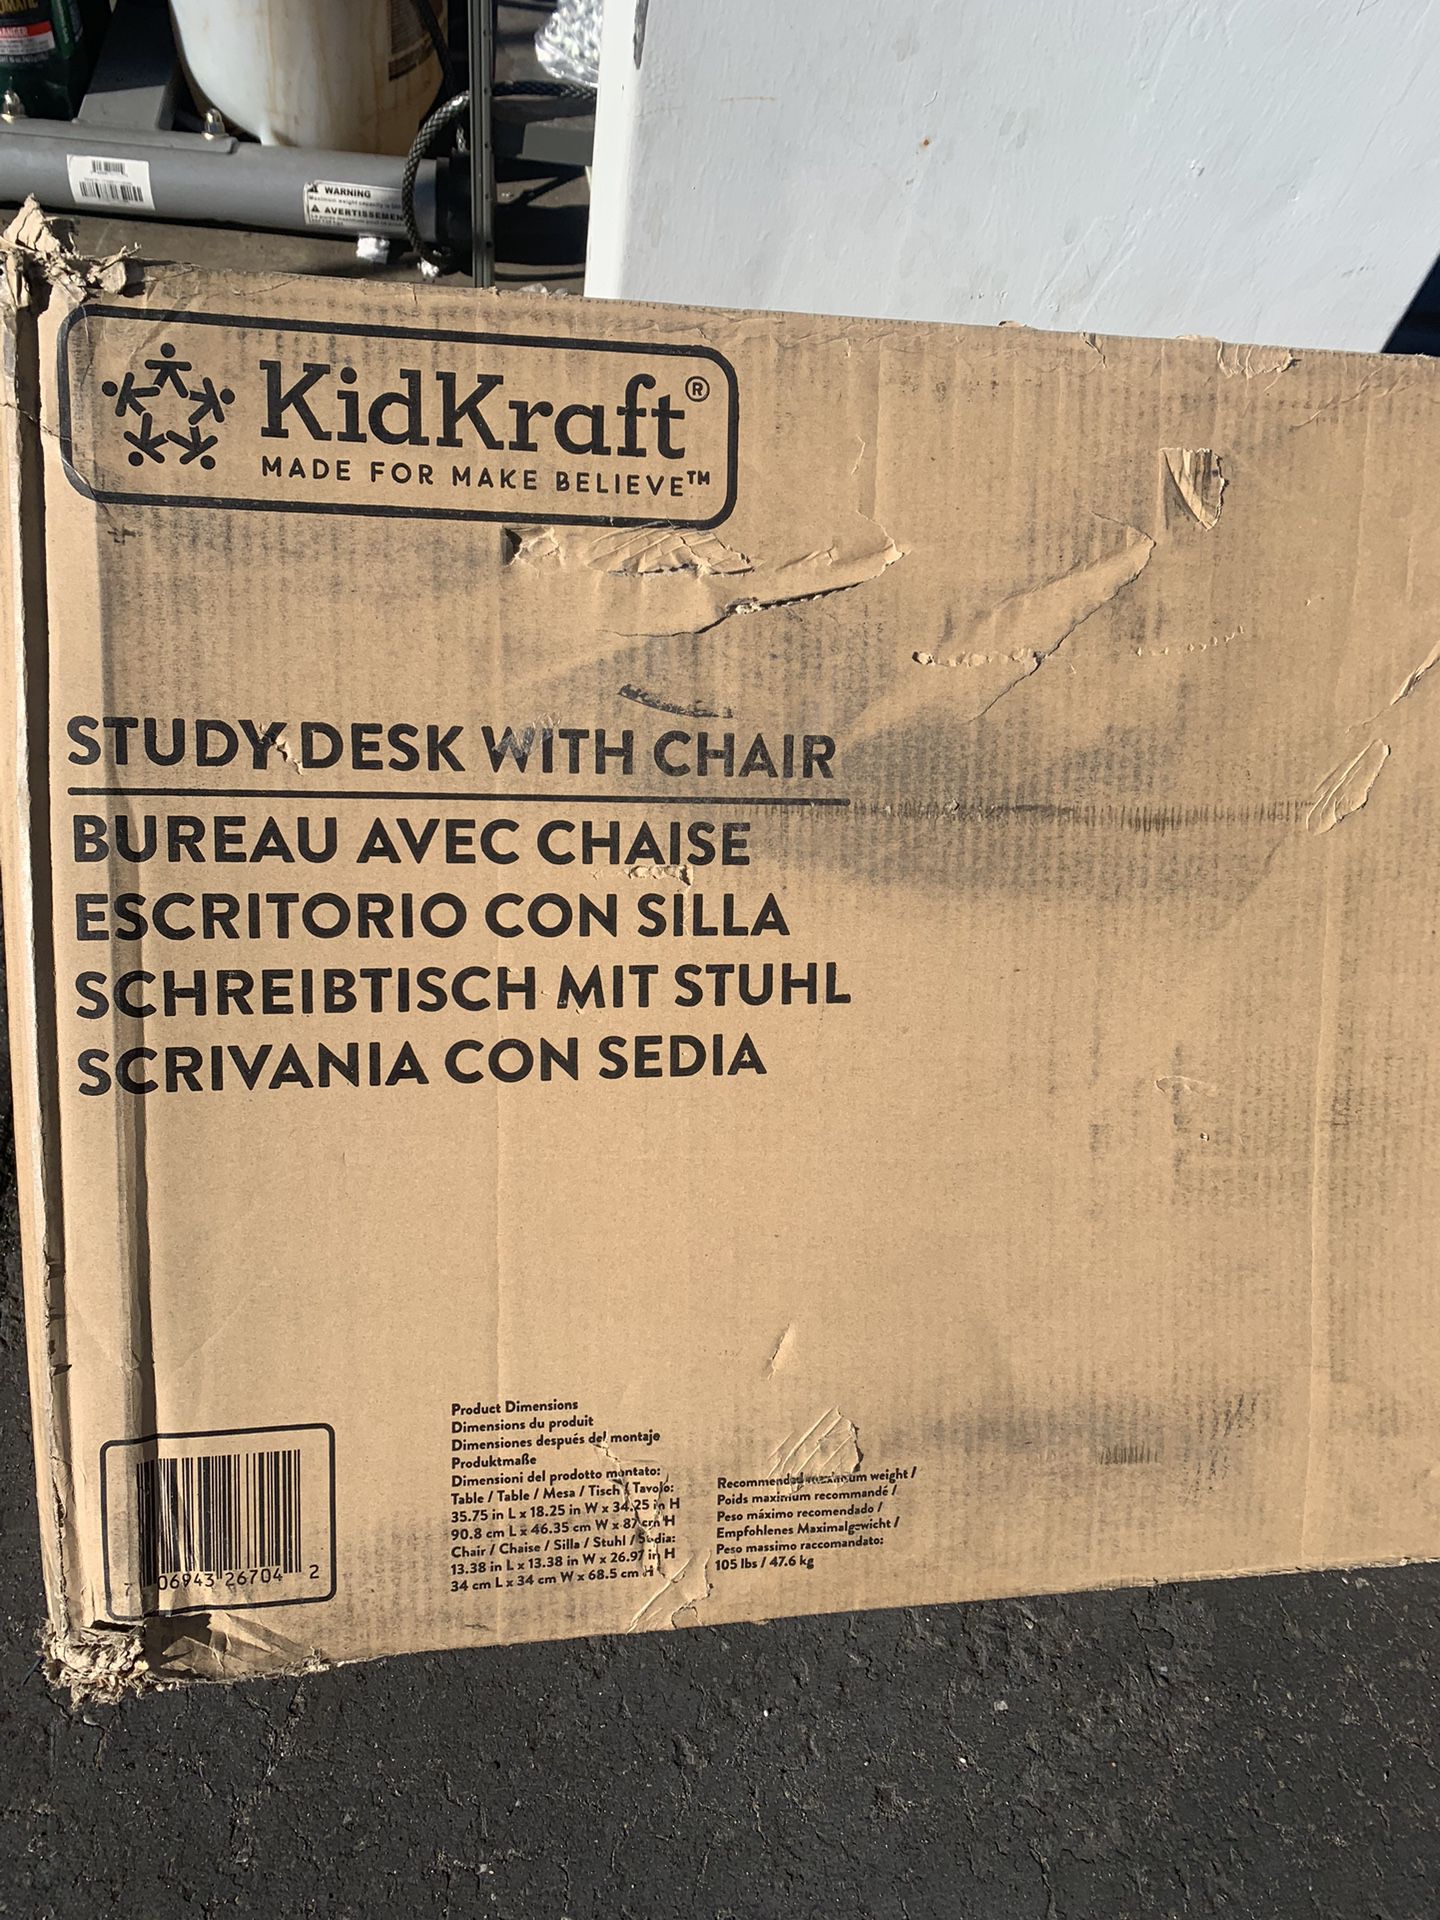 Study Desk with Chair - White - Kidkraft 26704(new)